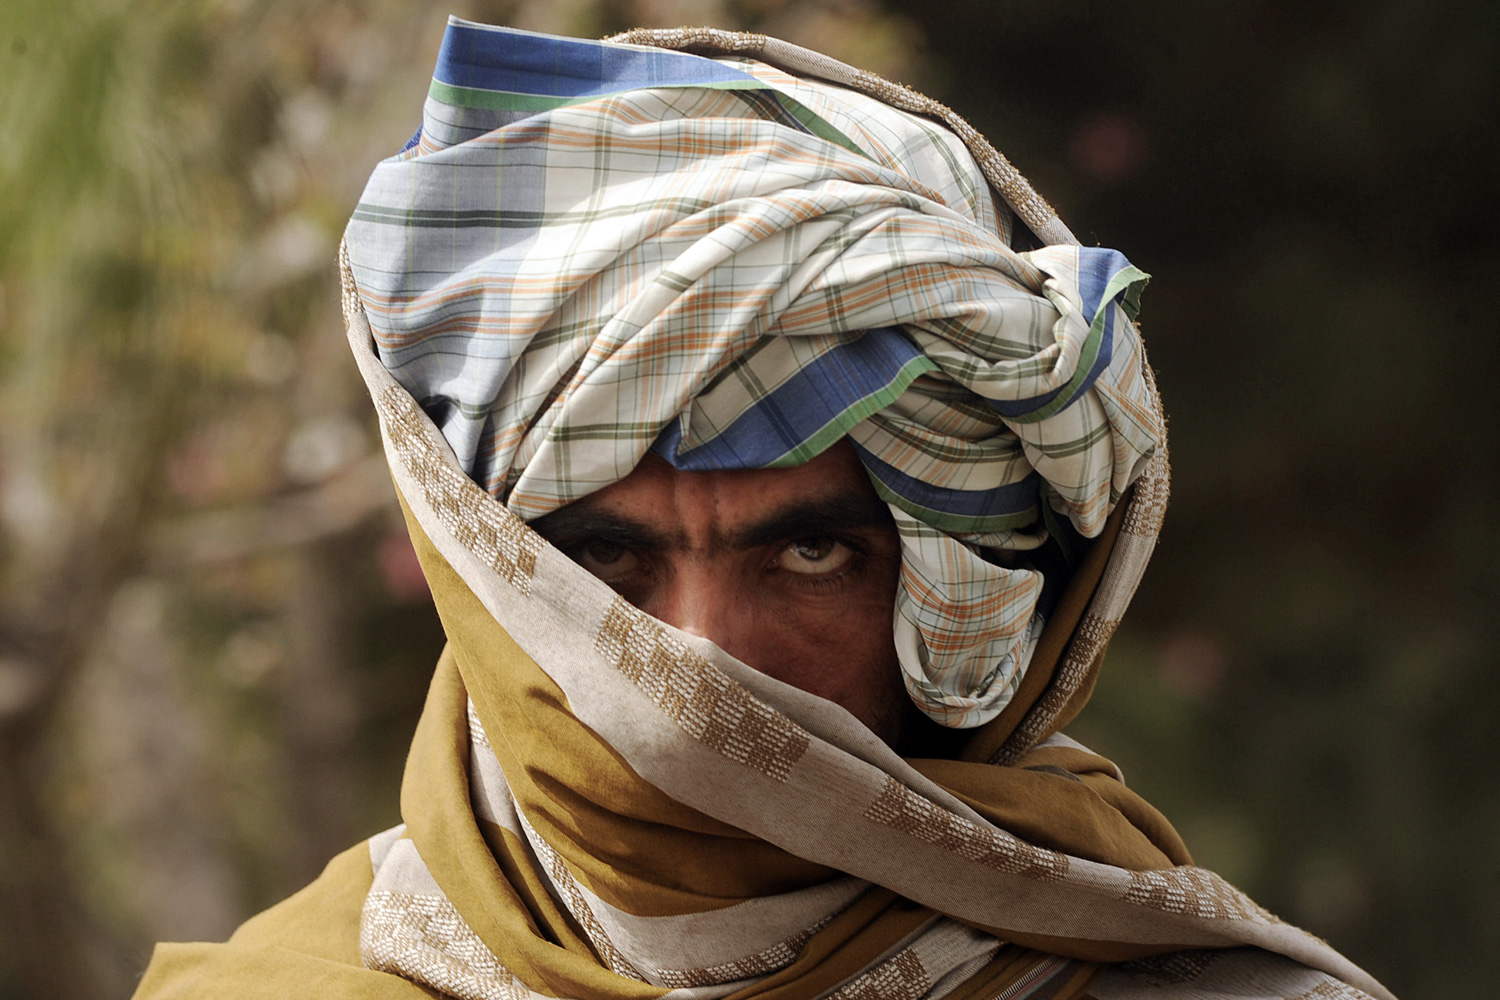 March 26, 2012. A former Taliban fighter looks on after joining Afghan government forces during a ceremony in Herat province, Afghanistan.